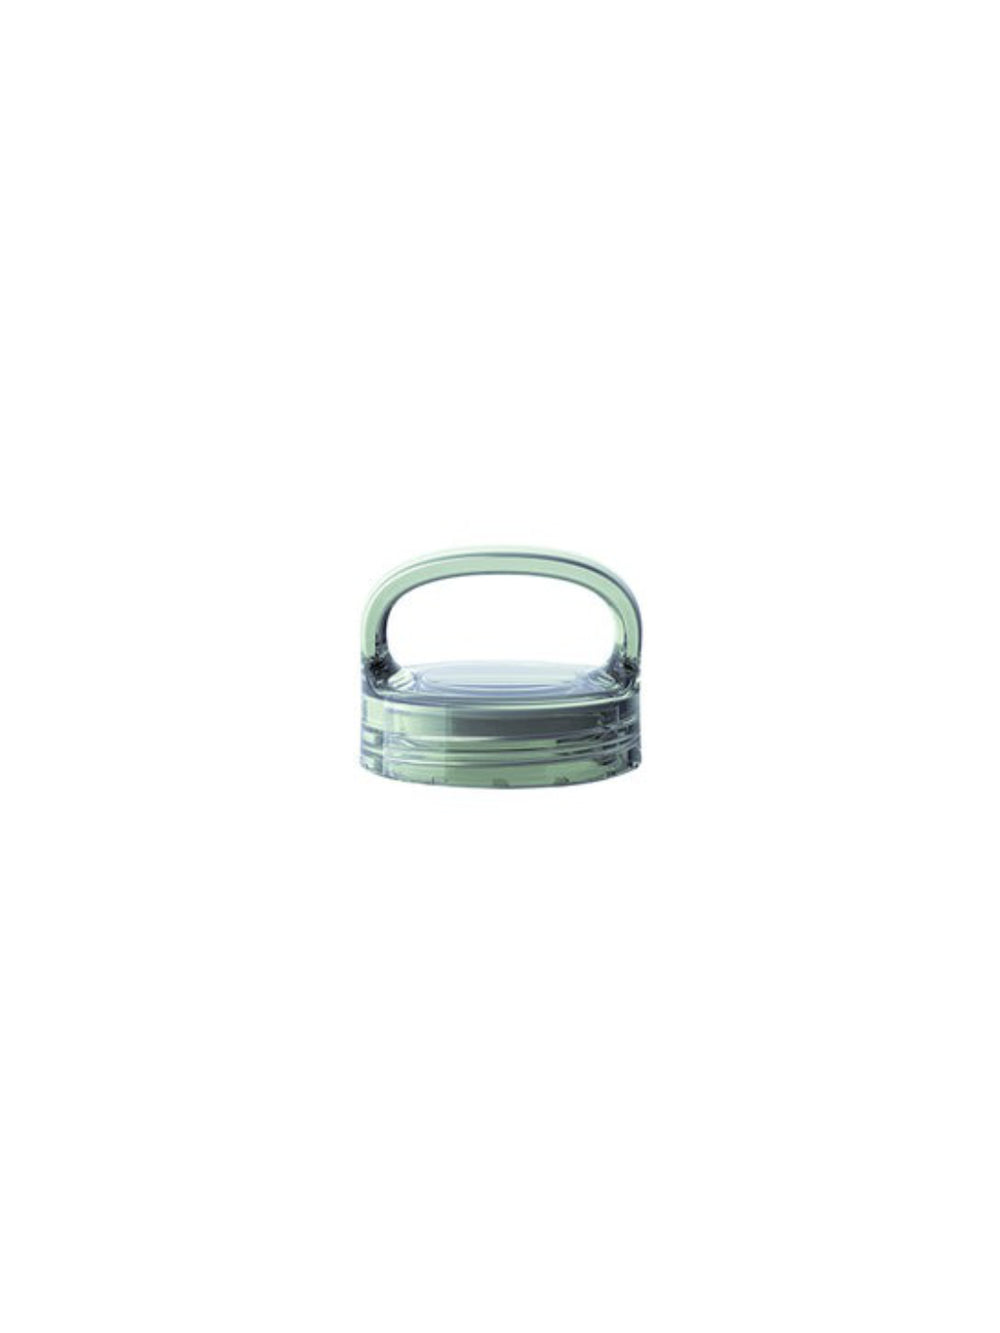 Photo of KINTO WATER Bottle Replacement Lid (300-500ml/10-17oz) ( Green ) [ KINTO ] [ Parts ]